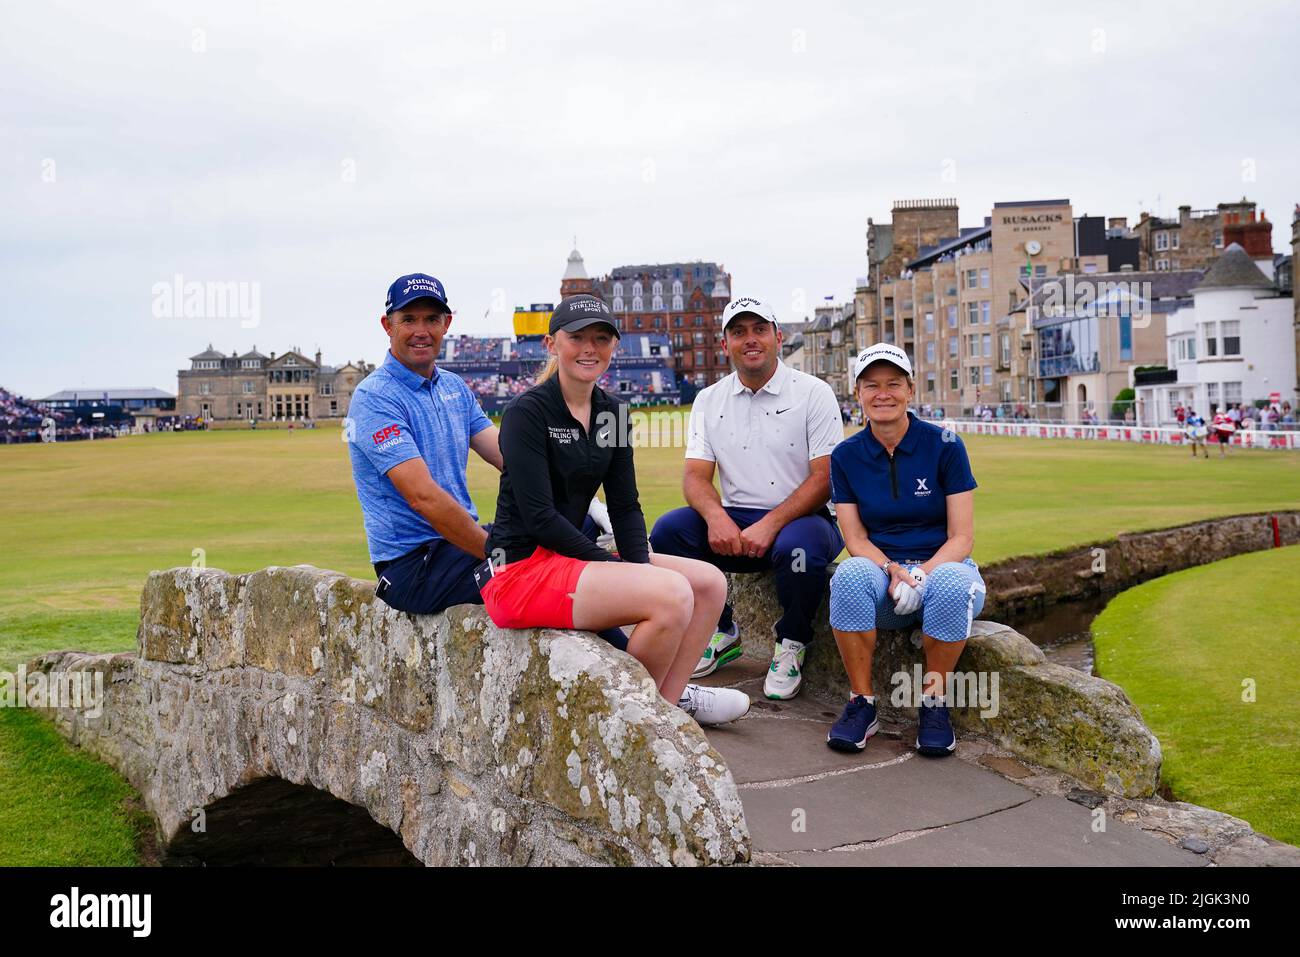 Team Matthew - Padraig Harrington, Louise Duncan, Francesco Molinari and Catriona Matthew pose for a photo on the Swilcan Bridge during the R&A Celebration of Champions event at the Old Course, St Andrews. Picture date: Monday July 11, 2022. Stock Photo